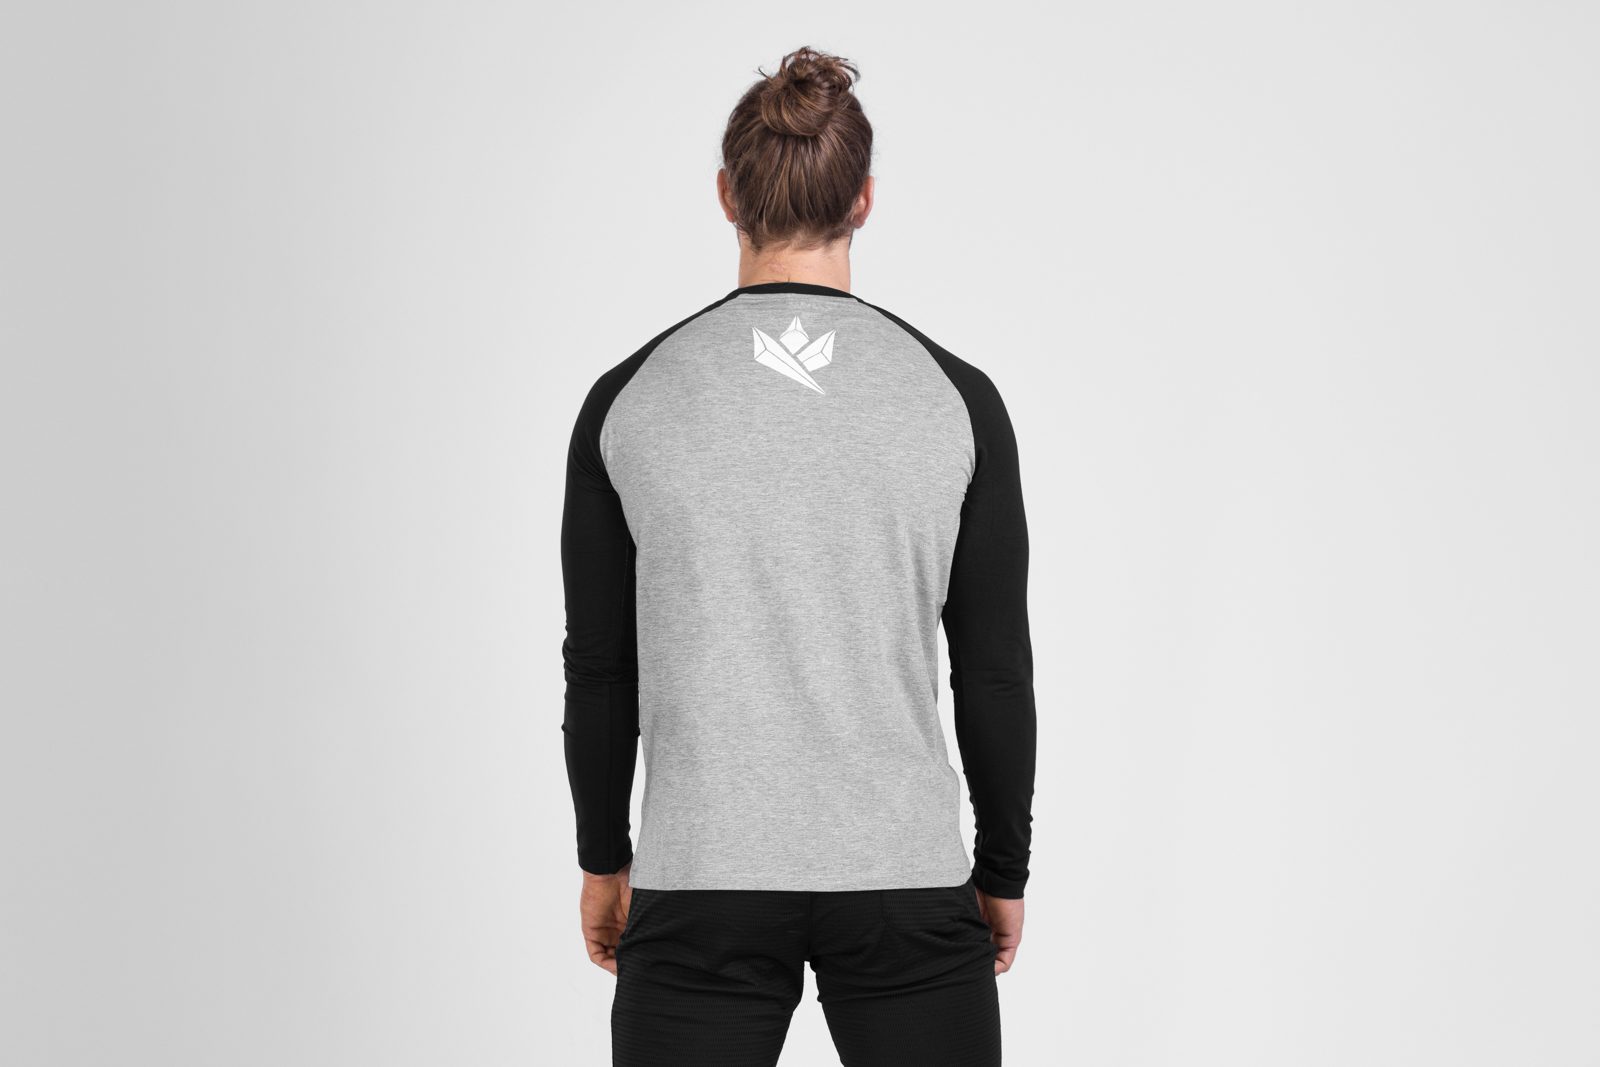 Classic Long Sleeve Shirt (Made for Athletes) | KingsBox